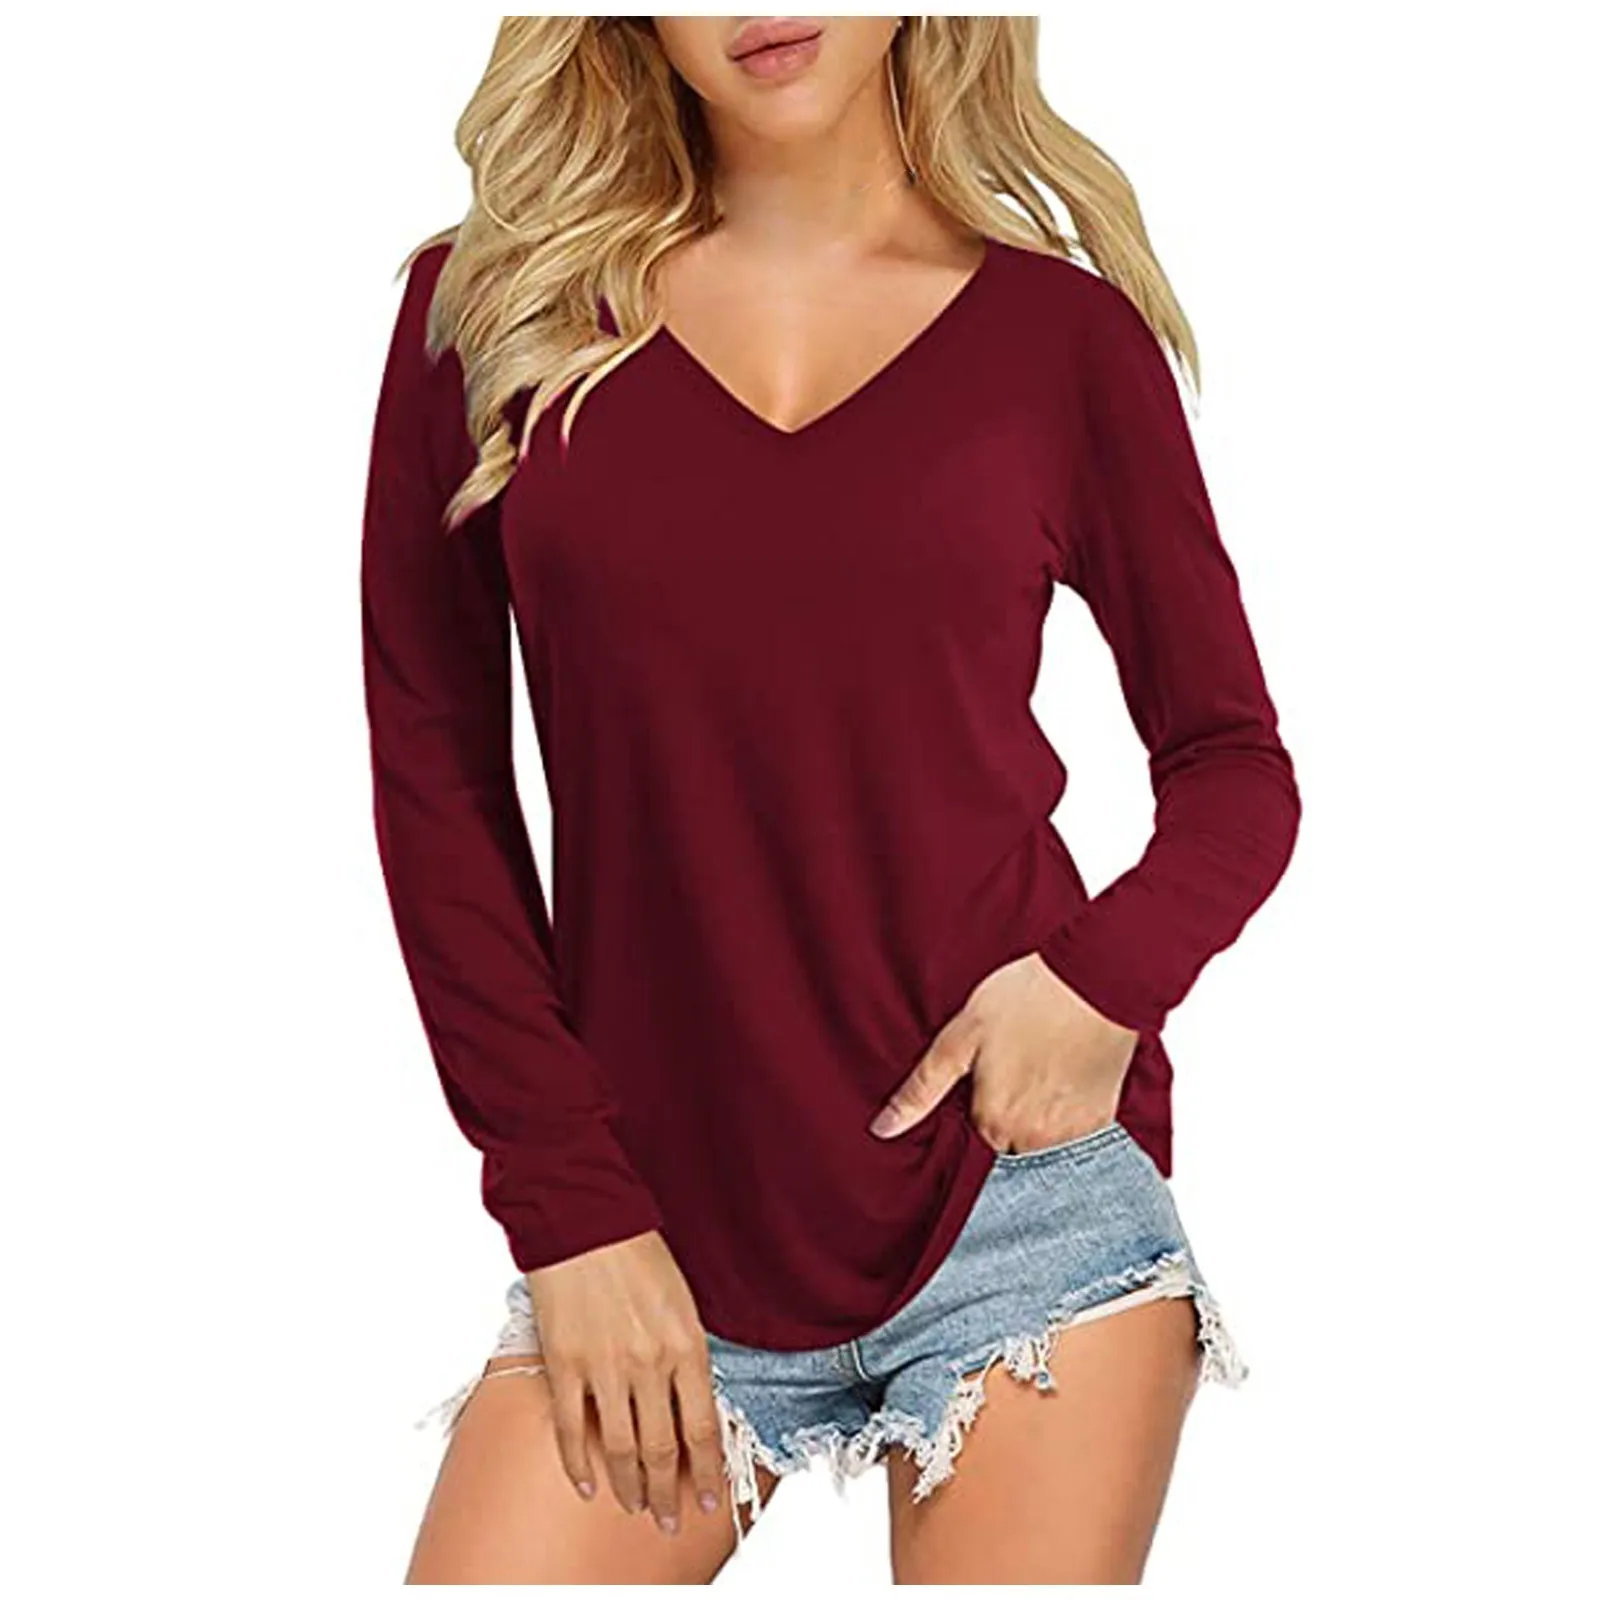 Tshirt Women Lady Fashion Tops Solid Color Loose Long Sleeve V-neck Casual Aesthetic Top Women T Shirt